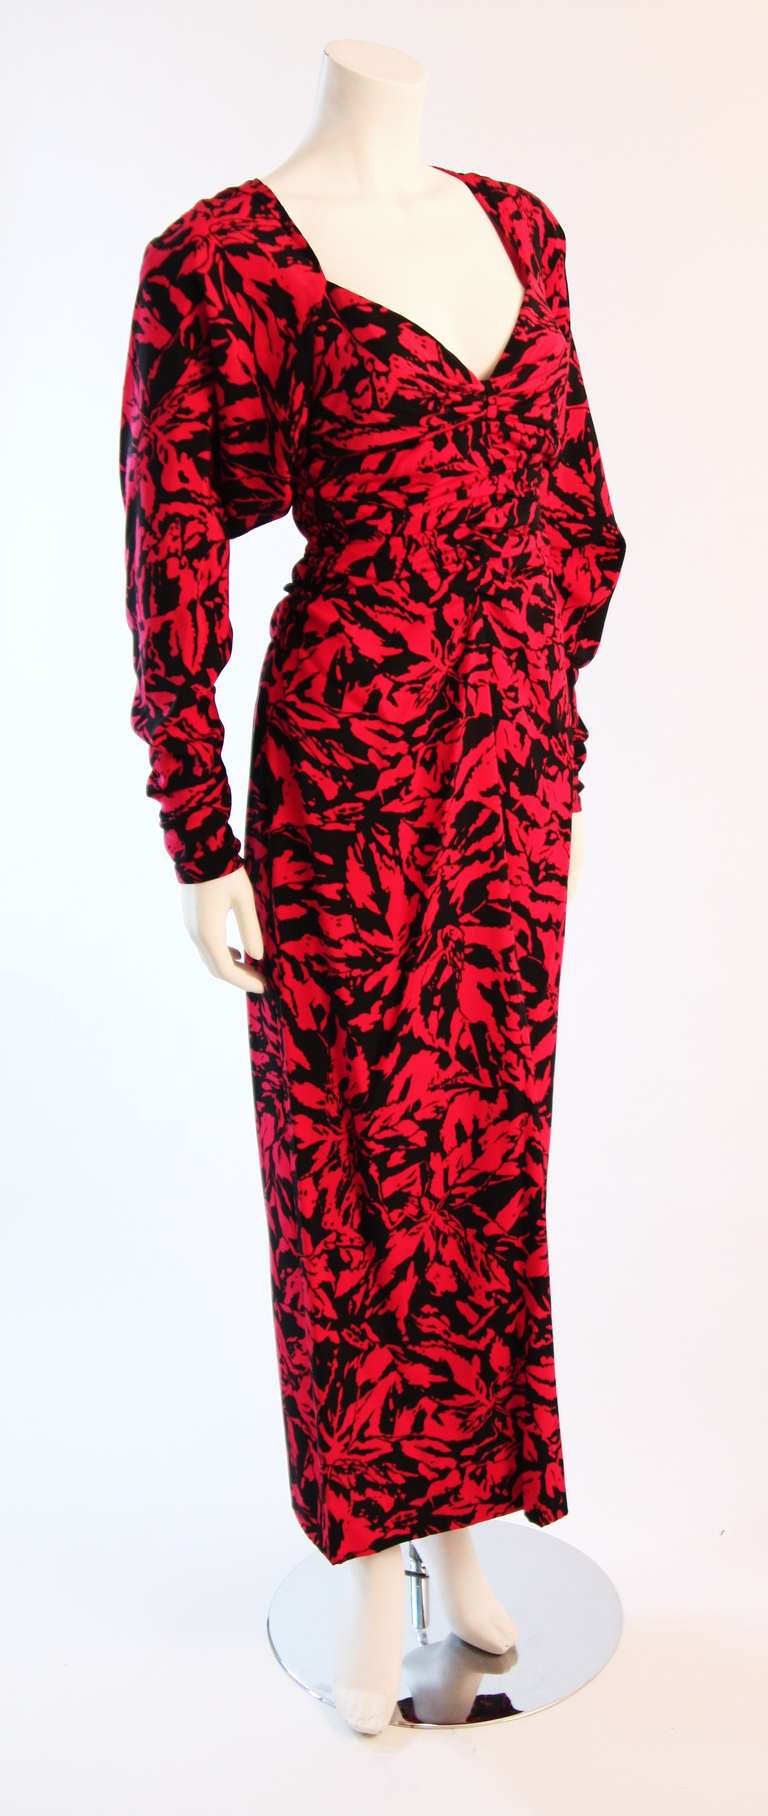 This is a Nina Ricci Haute Boutique gown. This gown is composed of a black and red abstract patterned silk. It features ruched details along the bust, sleeves, and shoulders. There is a zipper closure along the center back and sleeves. An absolute